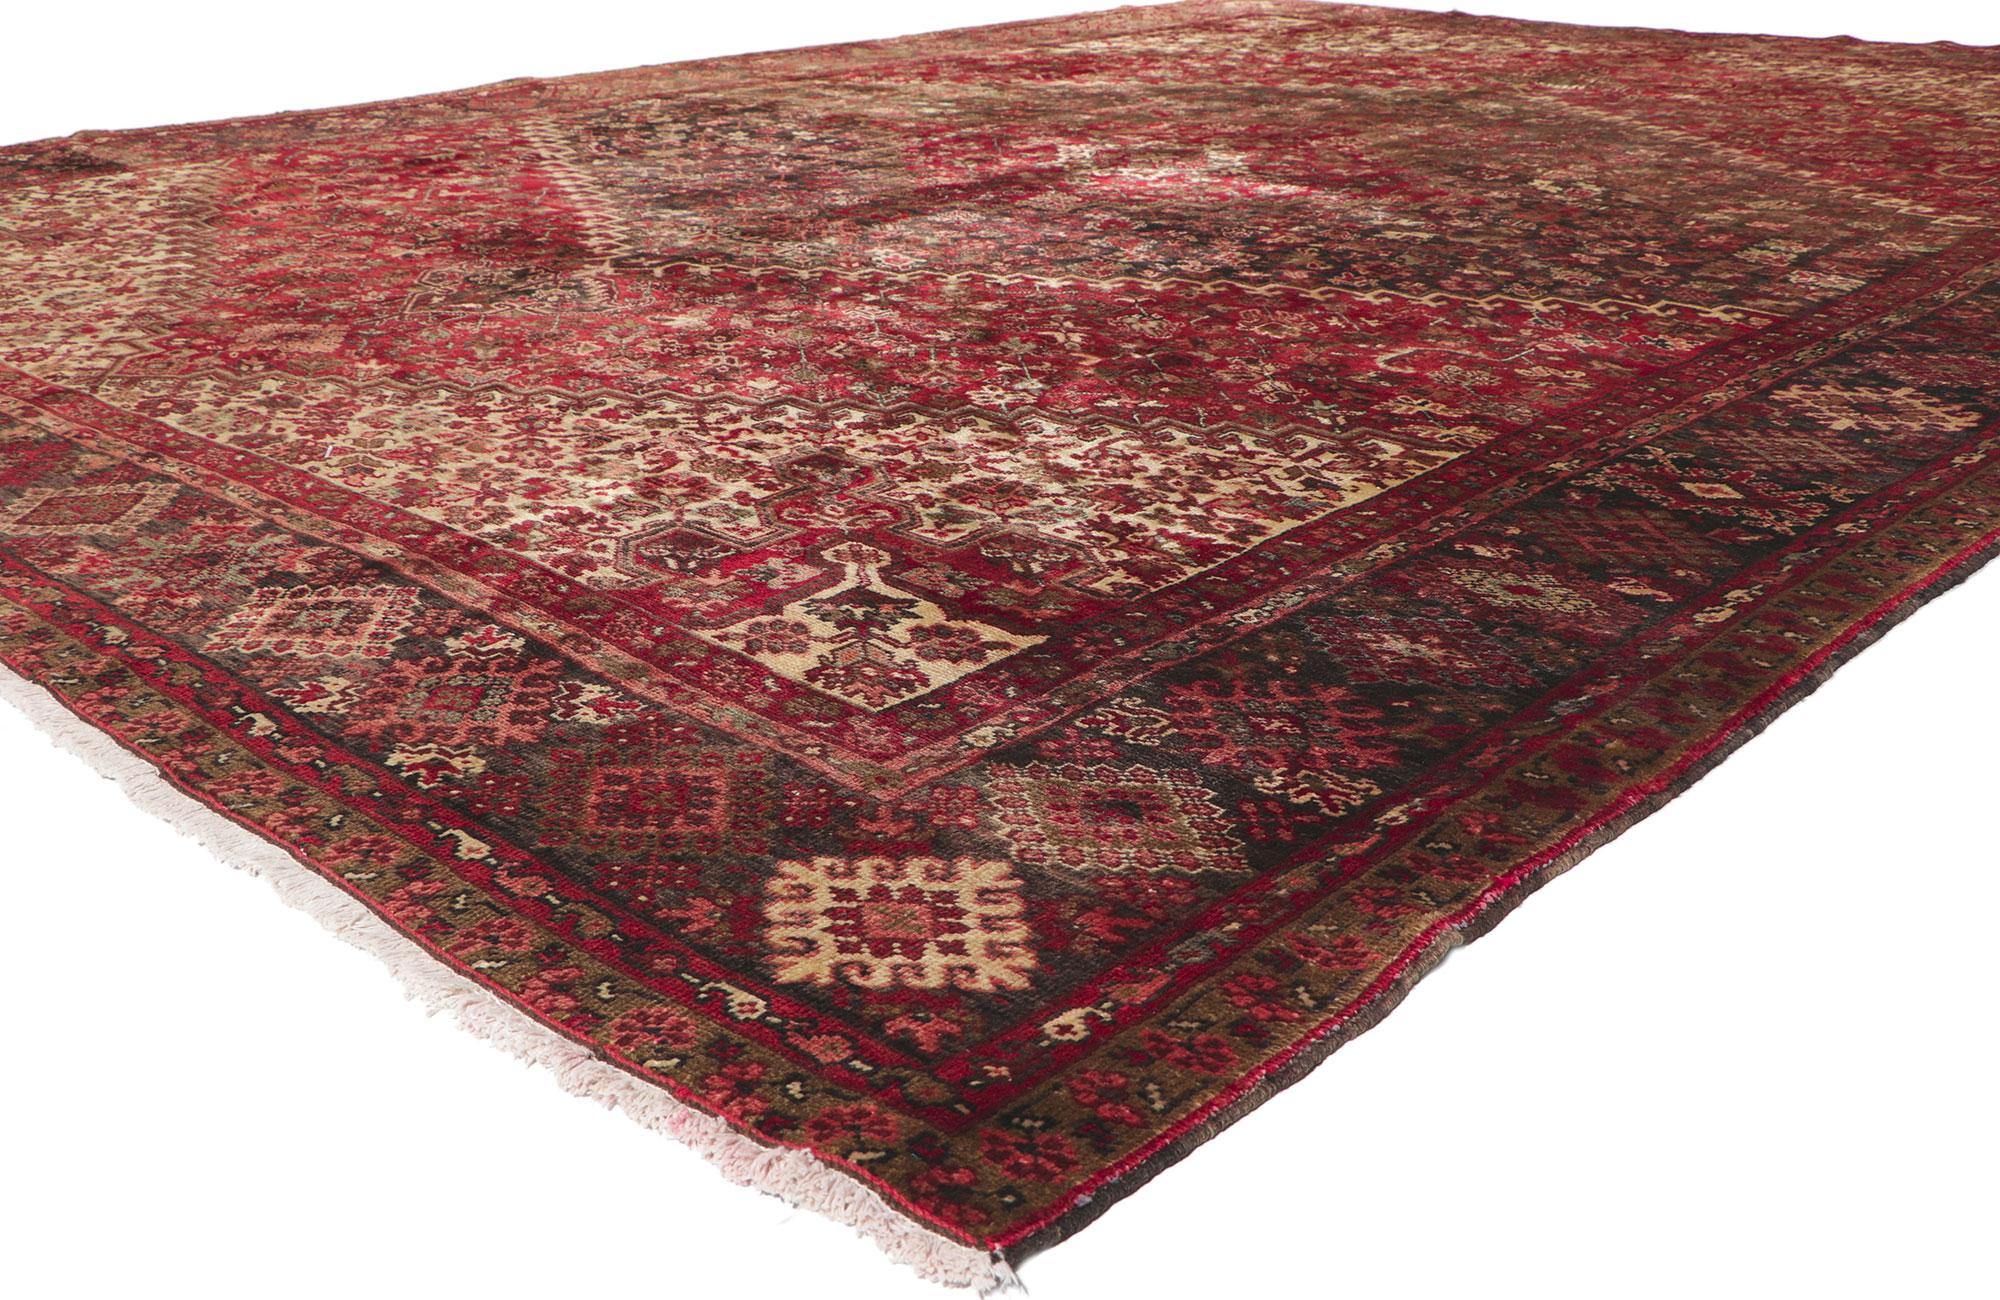 61196 Vintage Persian Heriz Rug, 11'05 x 14'11. Warm and inviting with a classic style, this hand-knotted wool vintage Persian Heriz rug charms with ease. The abrashed red field features a concentric medallion surrounded by an allover geometric